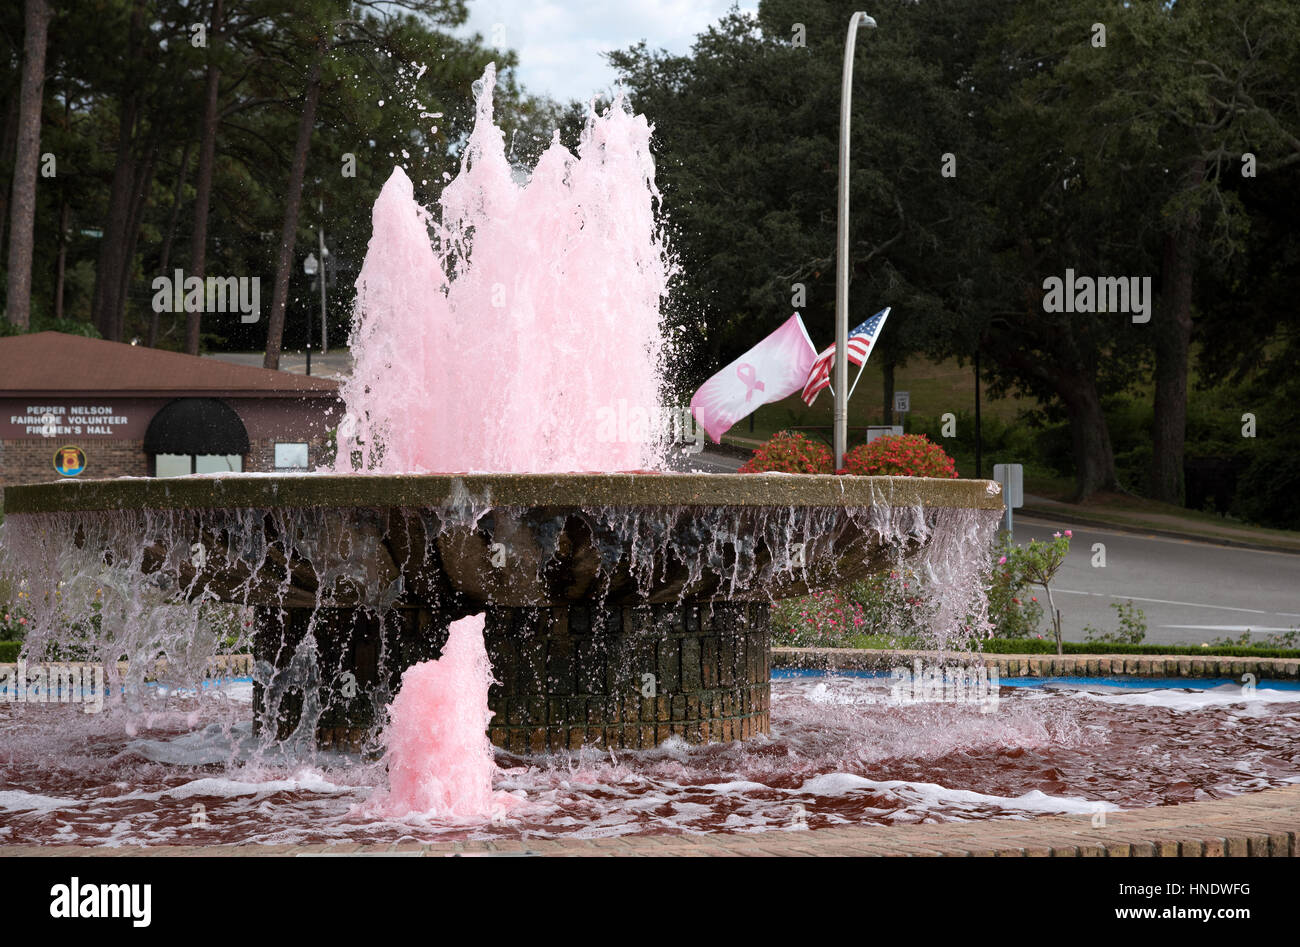 Fairhope Pier Fountain with pink colored water in support of Cancer Awareness in Alabama USA Stock Photo